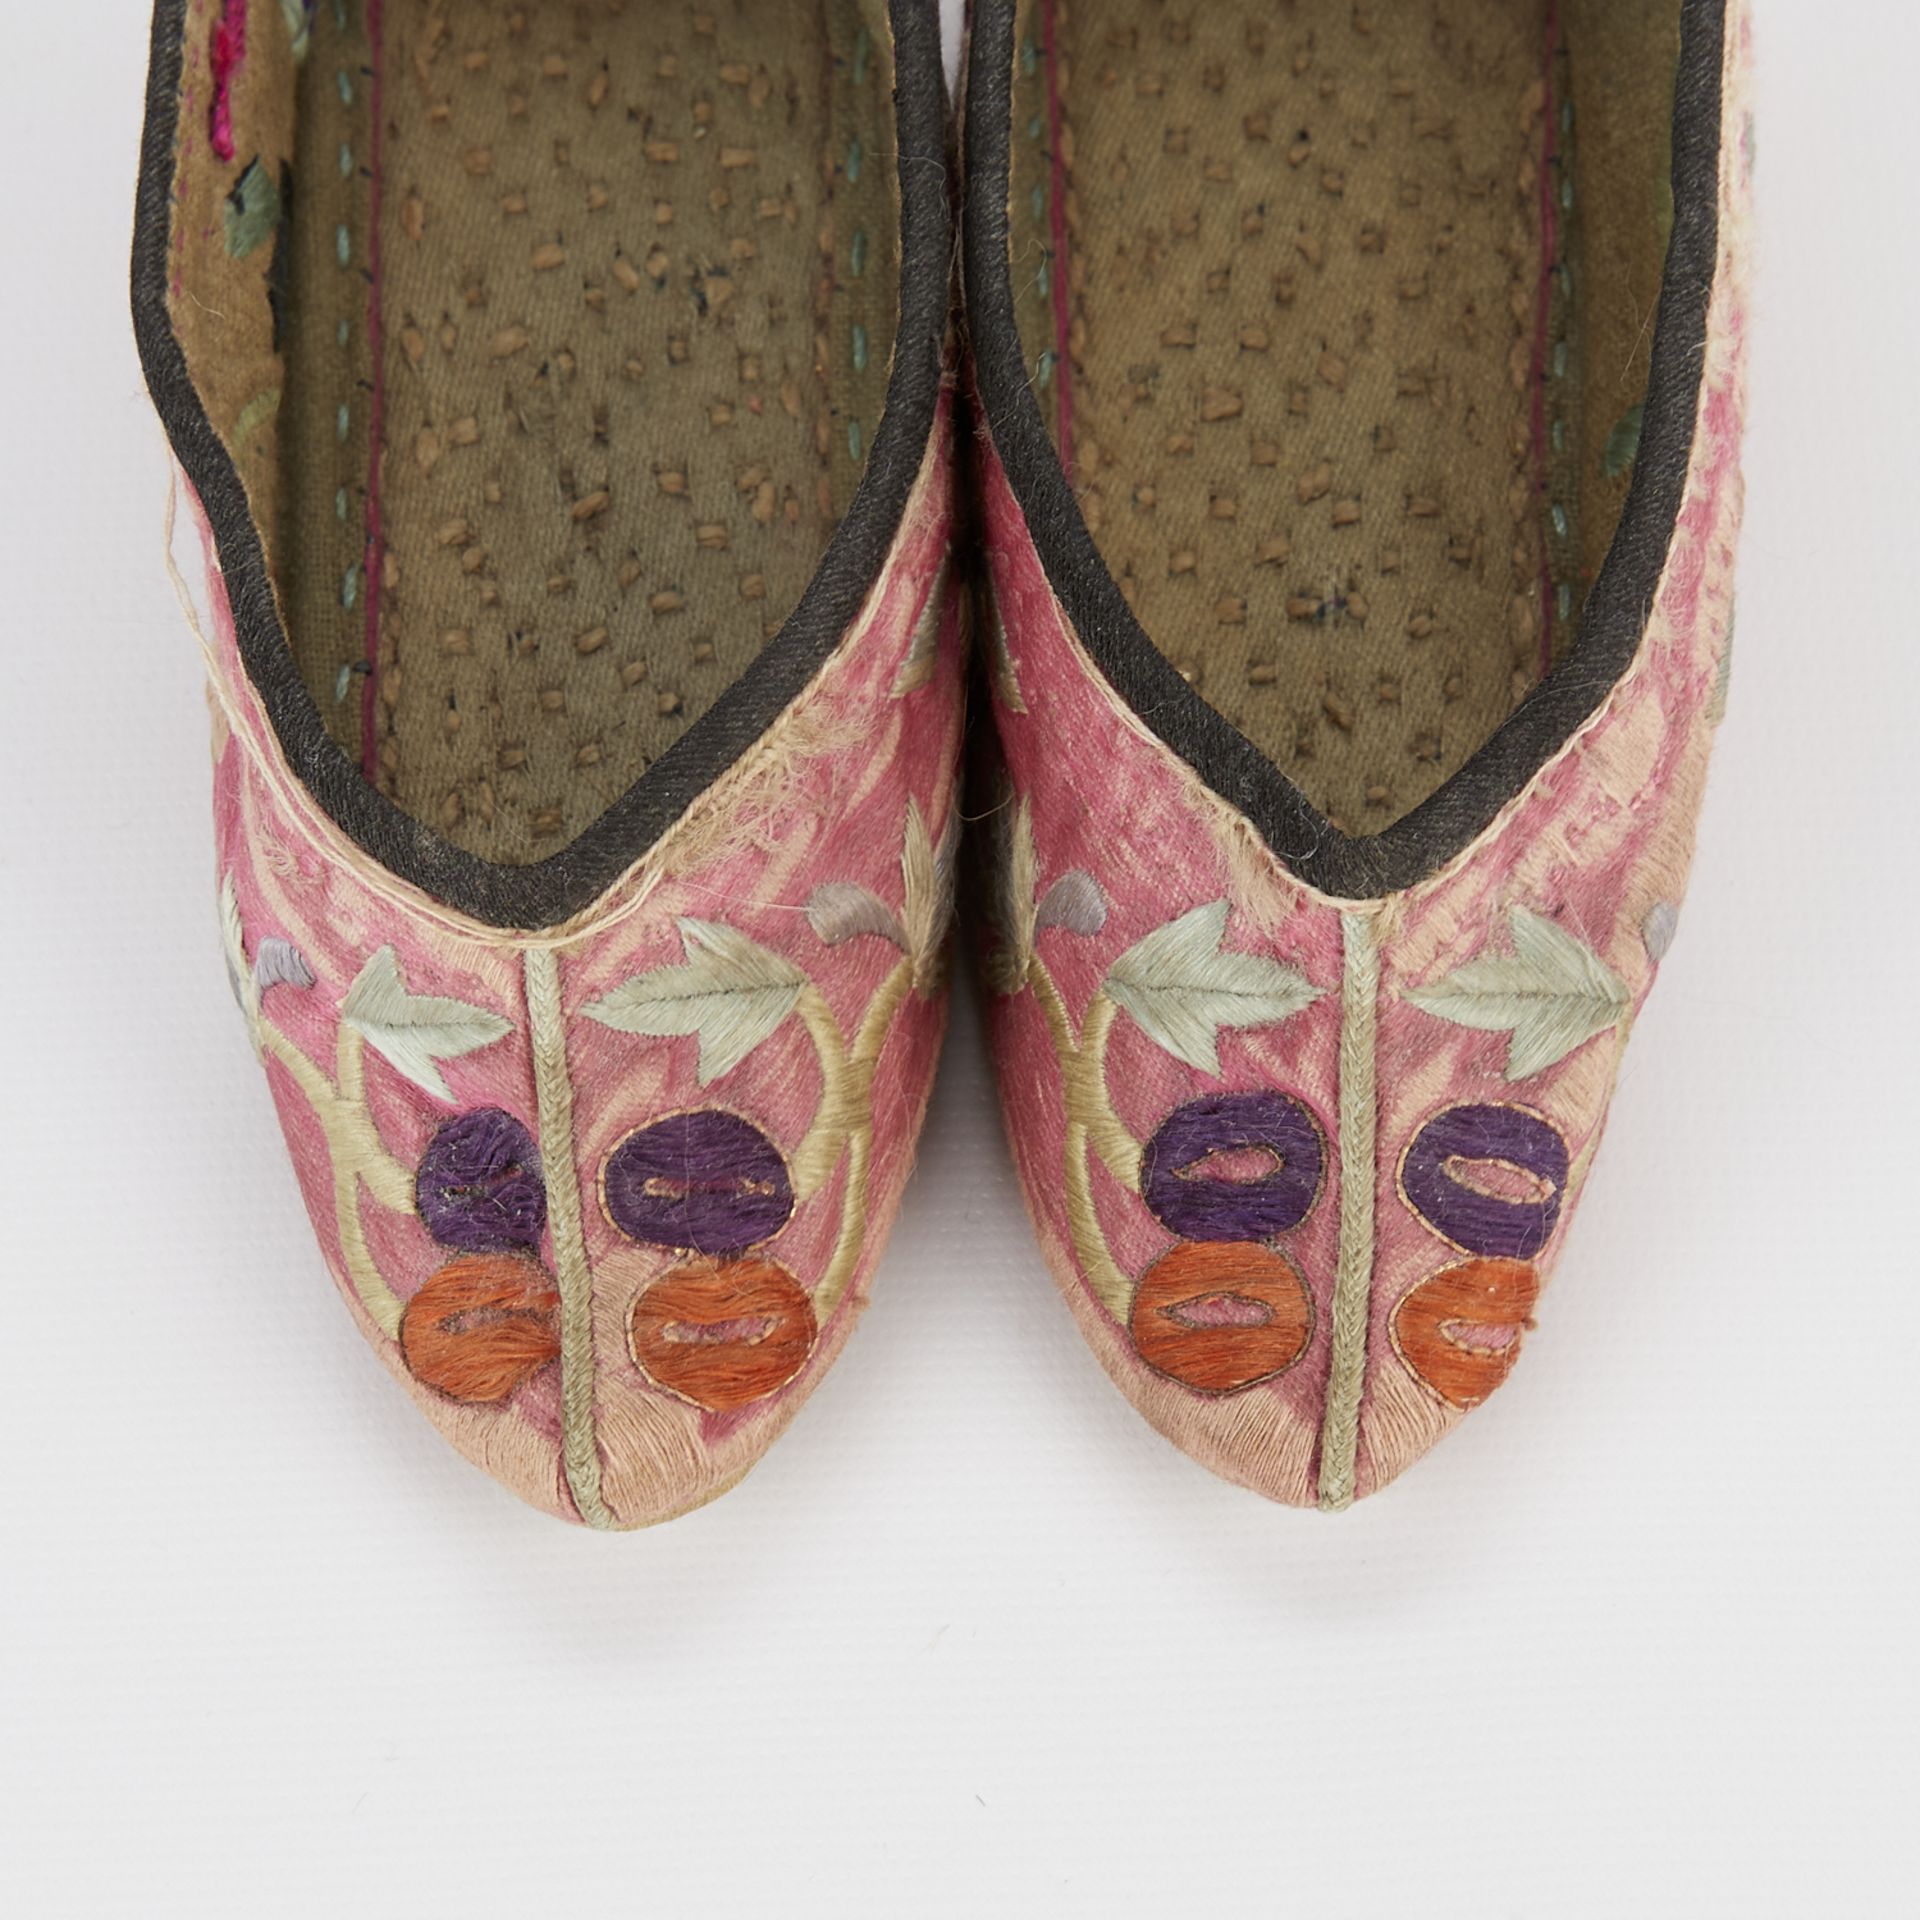 6 Pairs of Chinese Silk Foot Binding Shoes - Image 8 of 12